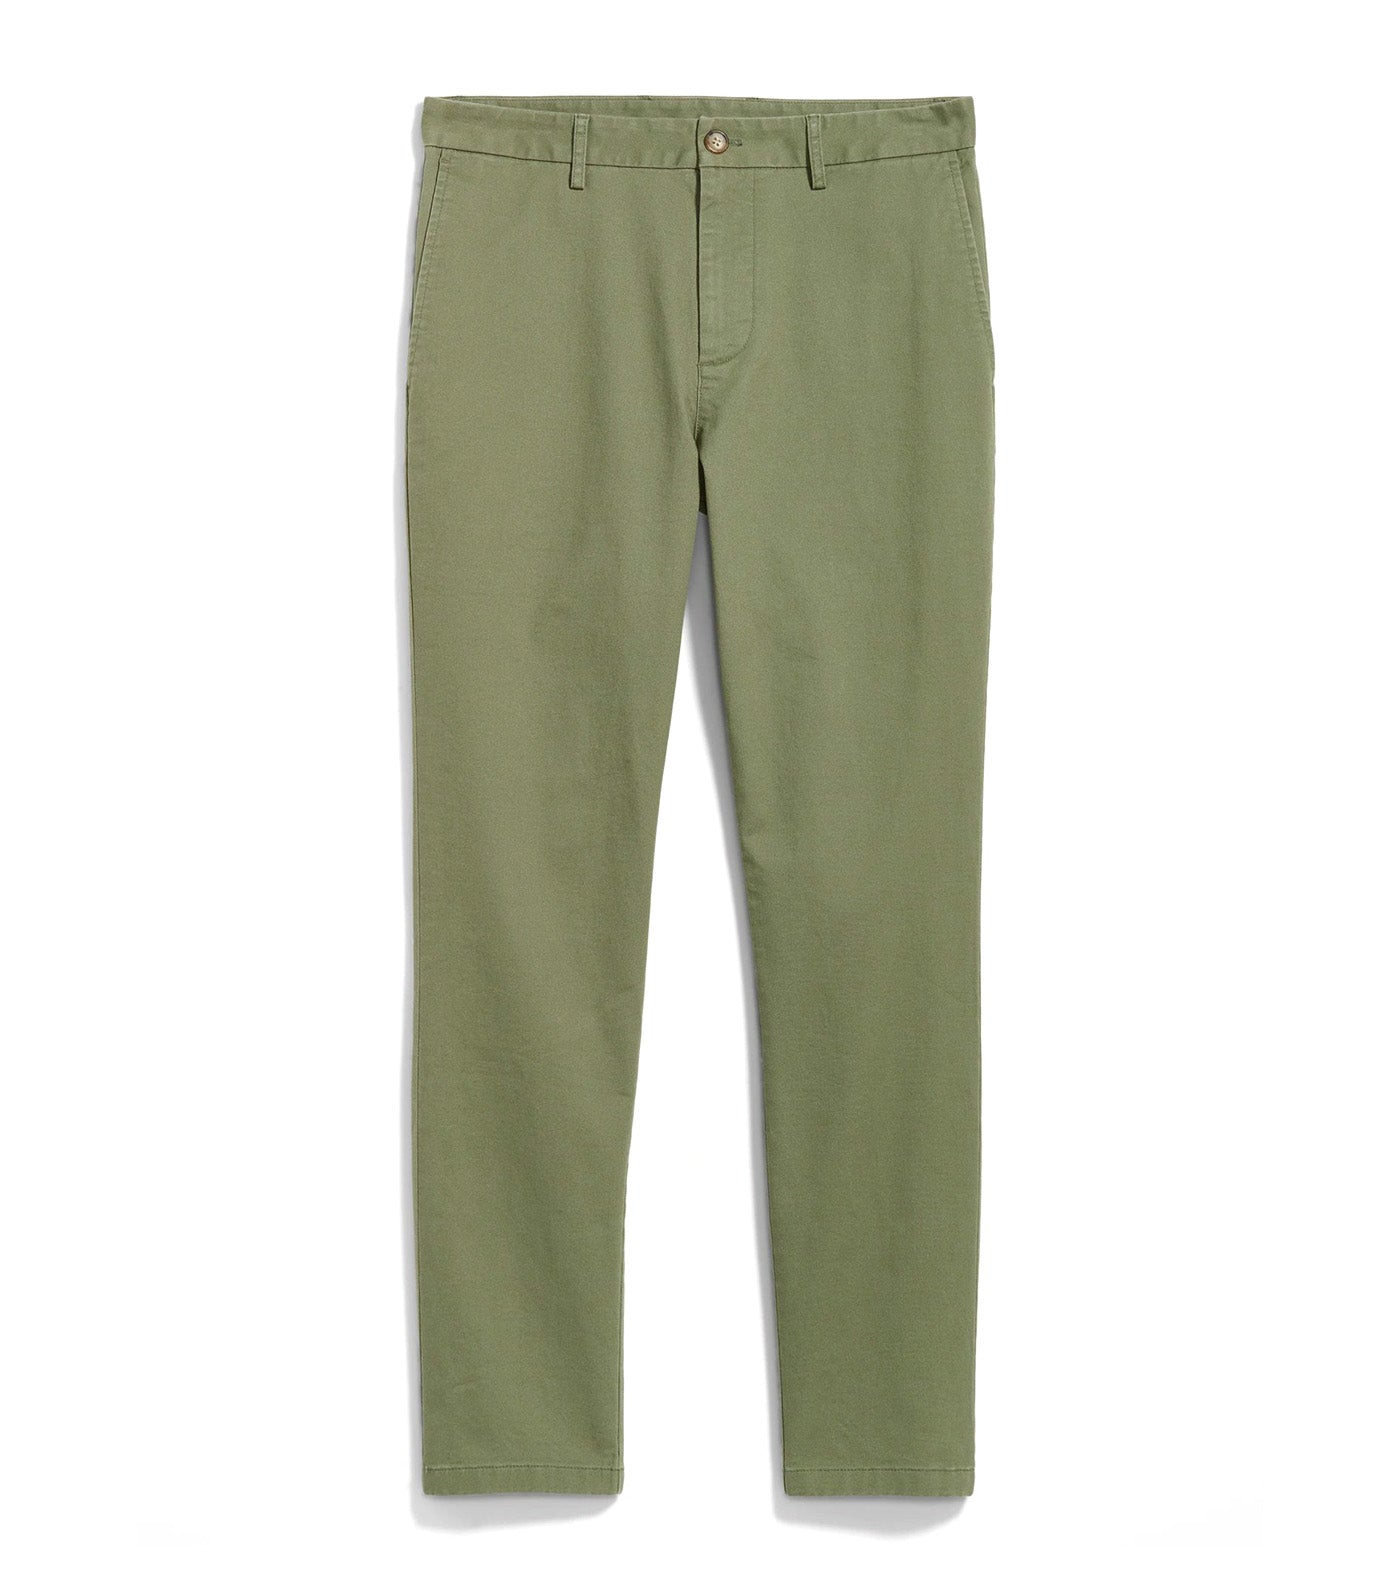 Slim Built-In Flex Rotation Chino Pants for Men Olive Through This